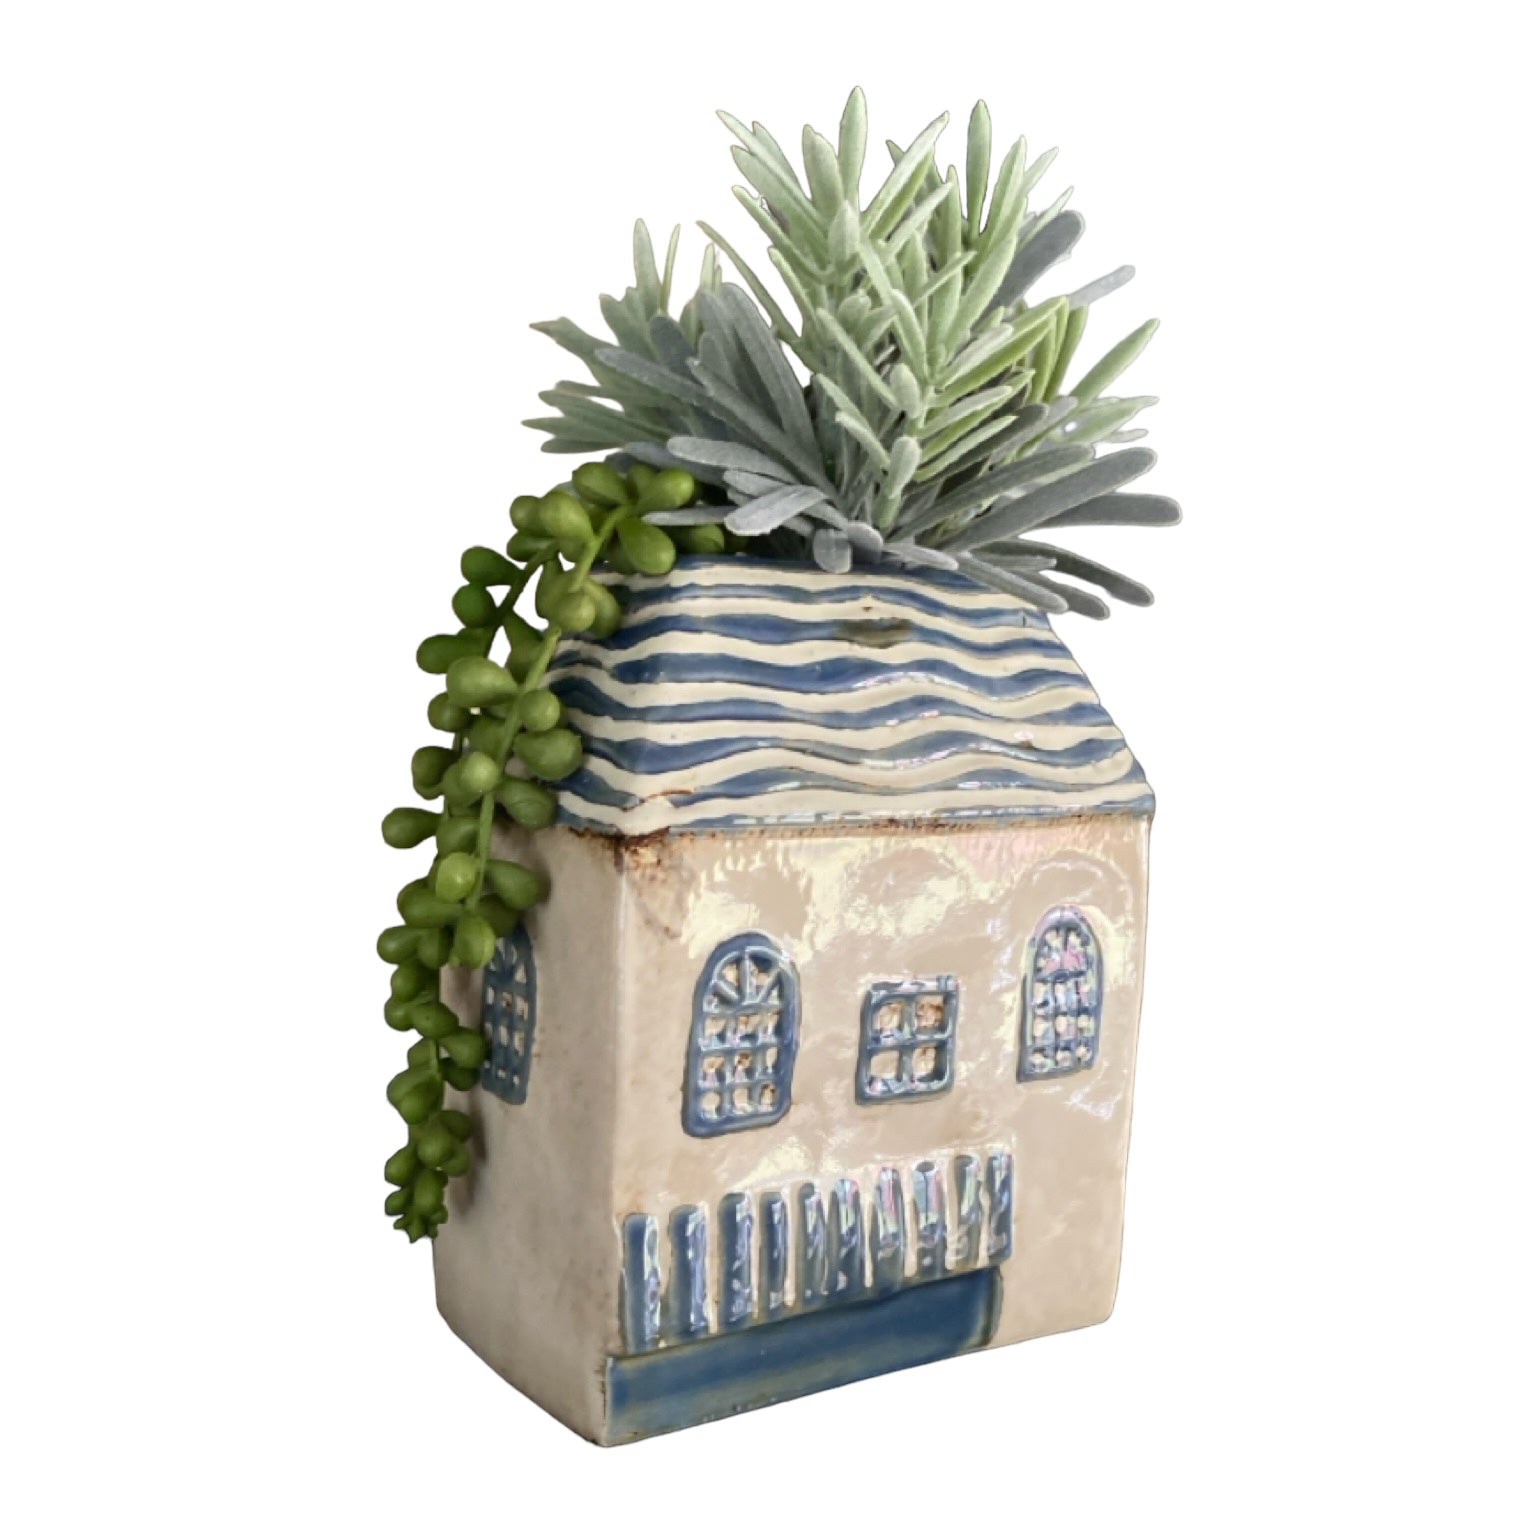 Village House Blue Pot Plant Garden - The Renmy Store Homewares & Gifts 